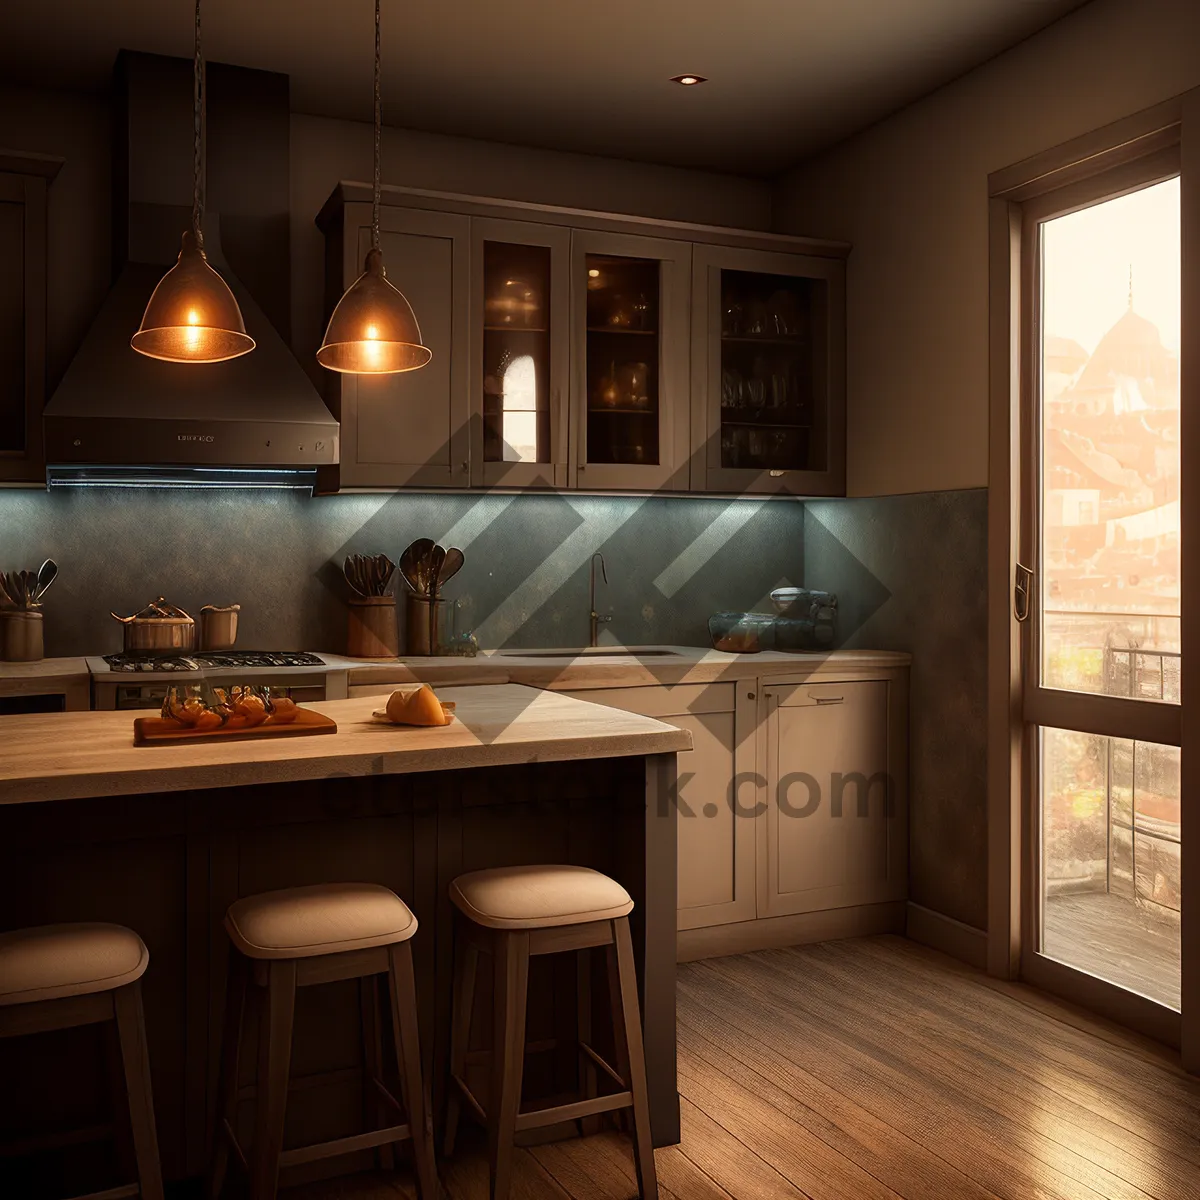 Picture of Kitchen design featuring top-notch appliances and trendy accessories